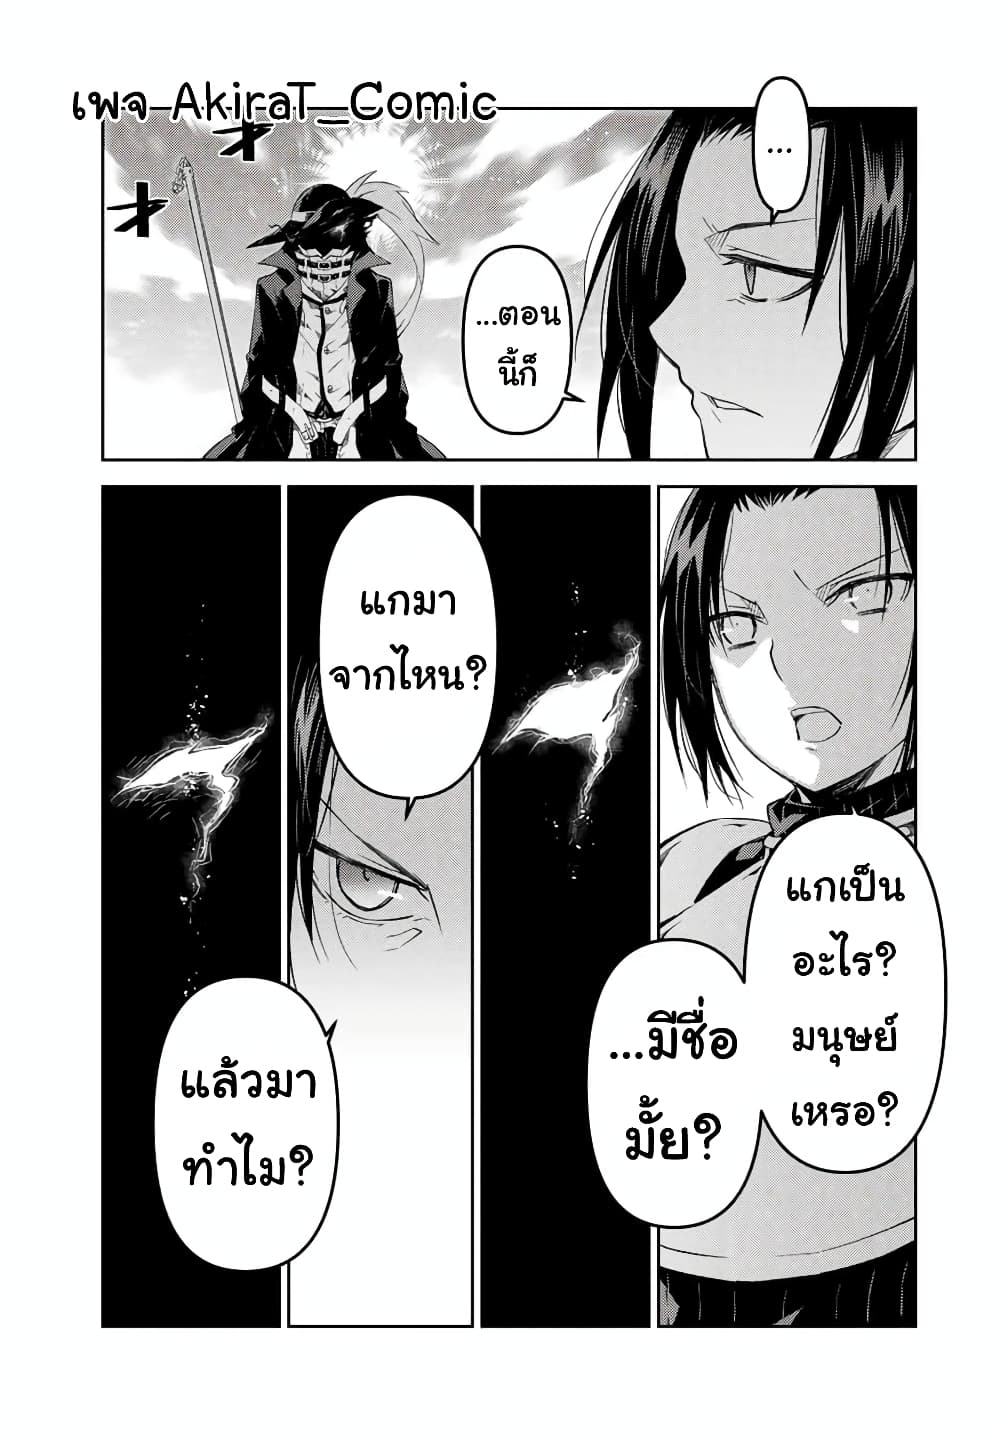 The Weakest Occupation "Blacksmith", but It's Actually the Strongest ช่างตีเหล็กอาชีพกระจอก? 52-52